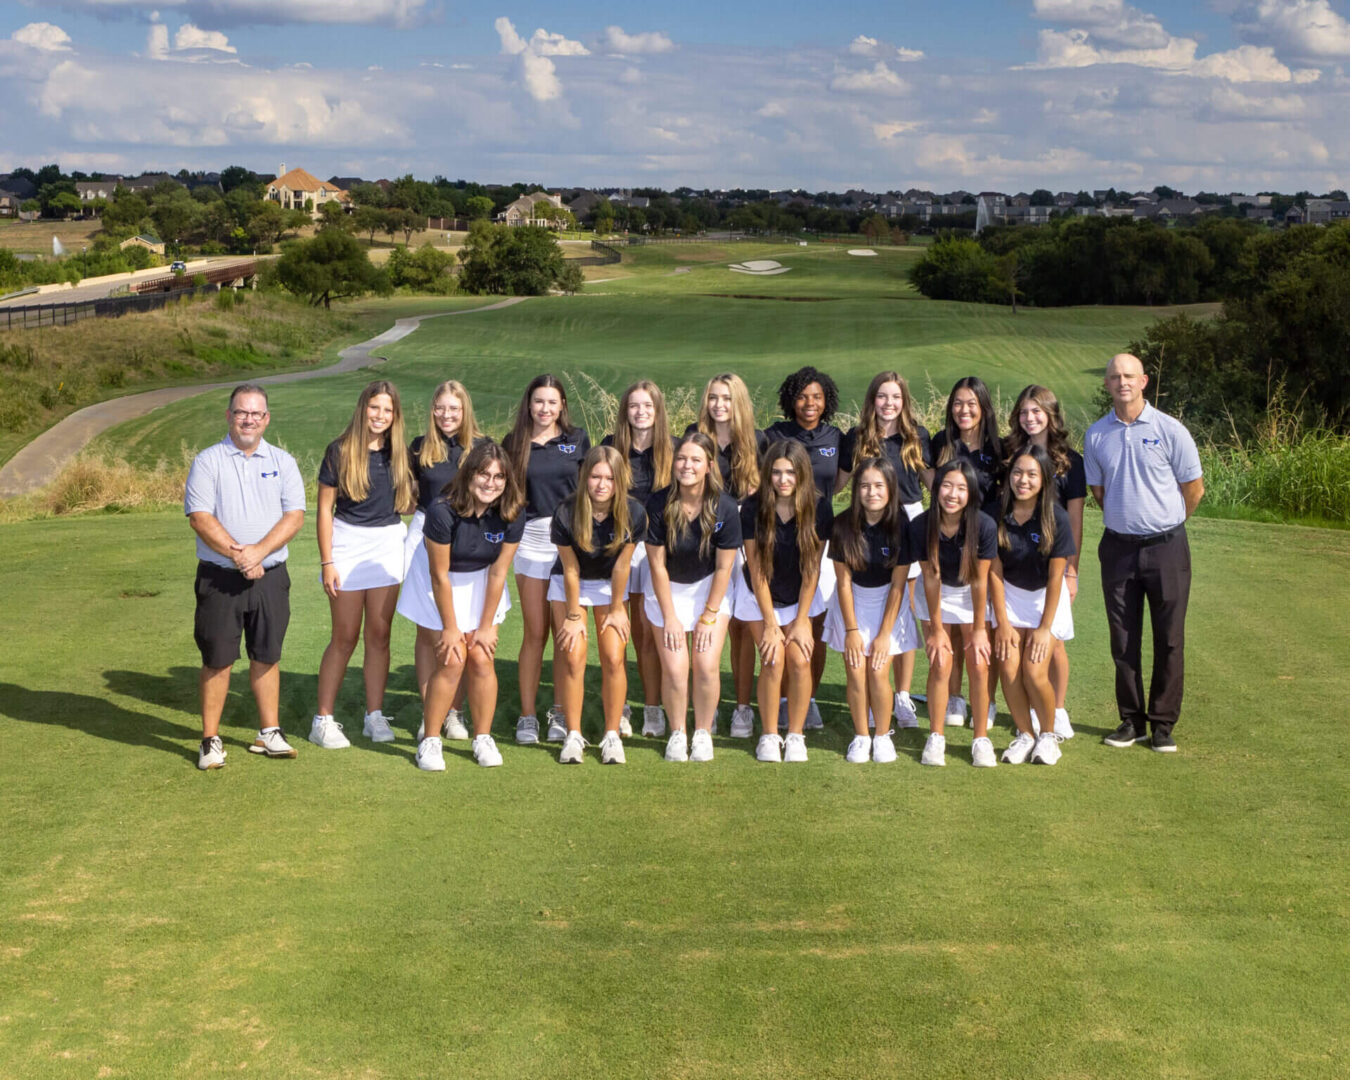 golf team for girls standing together for a picture